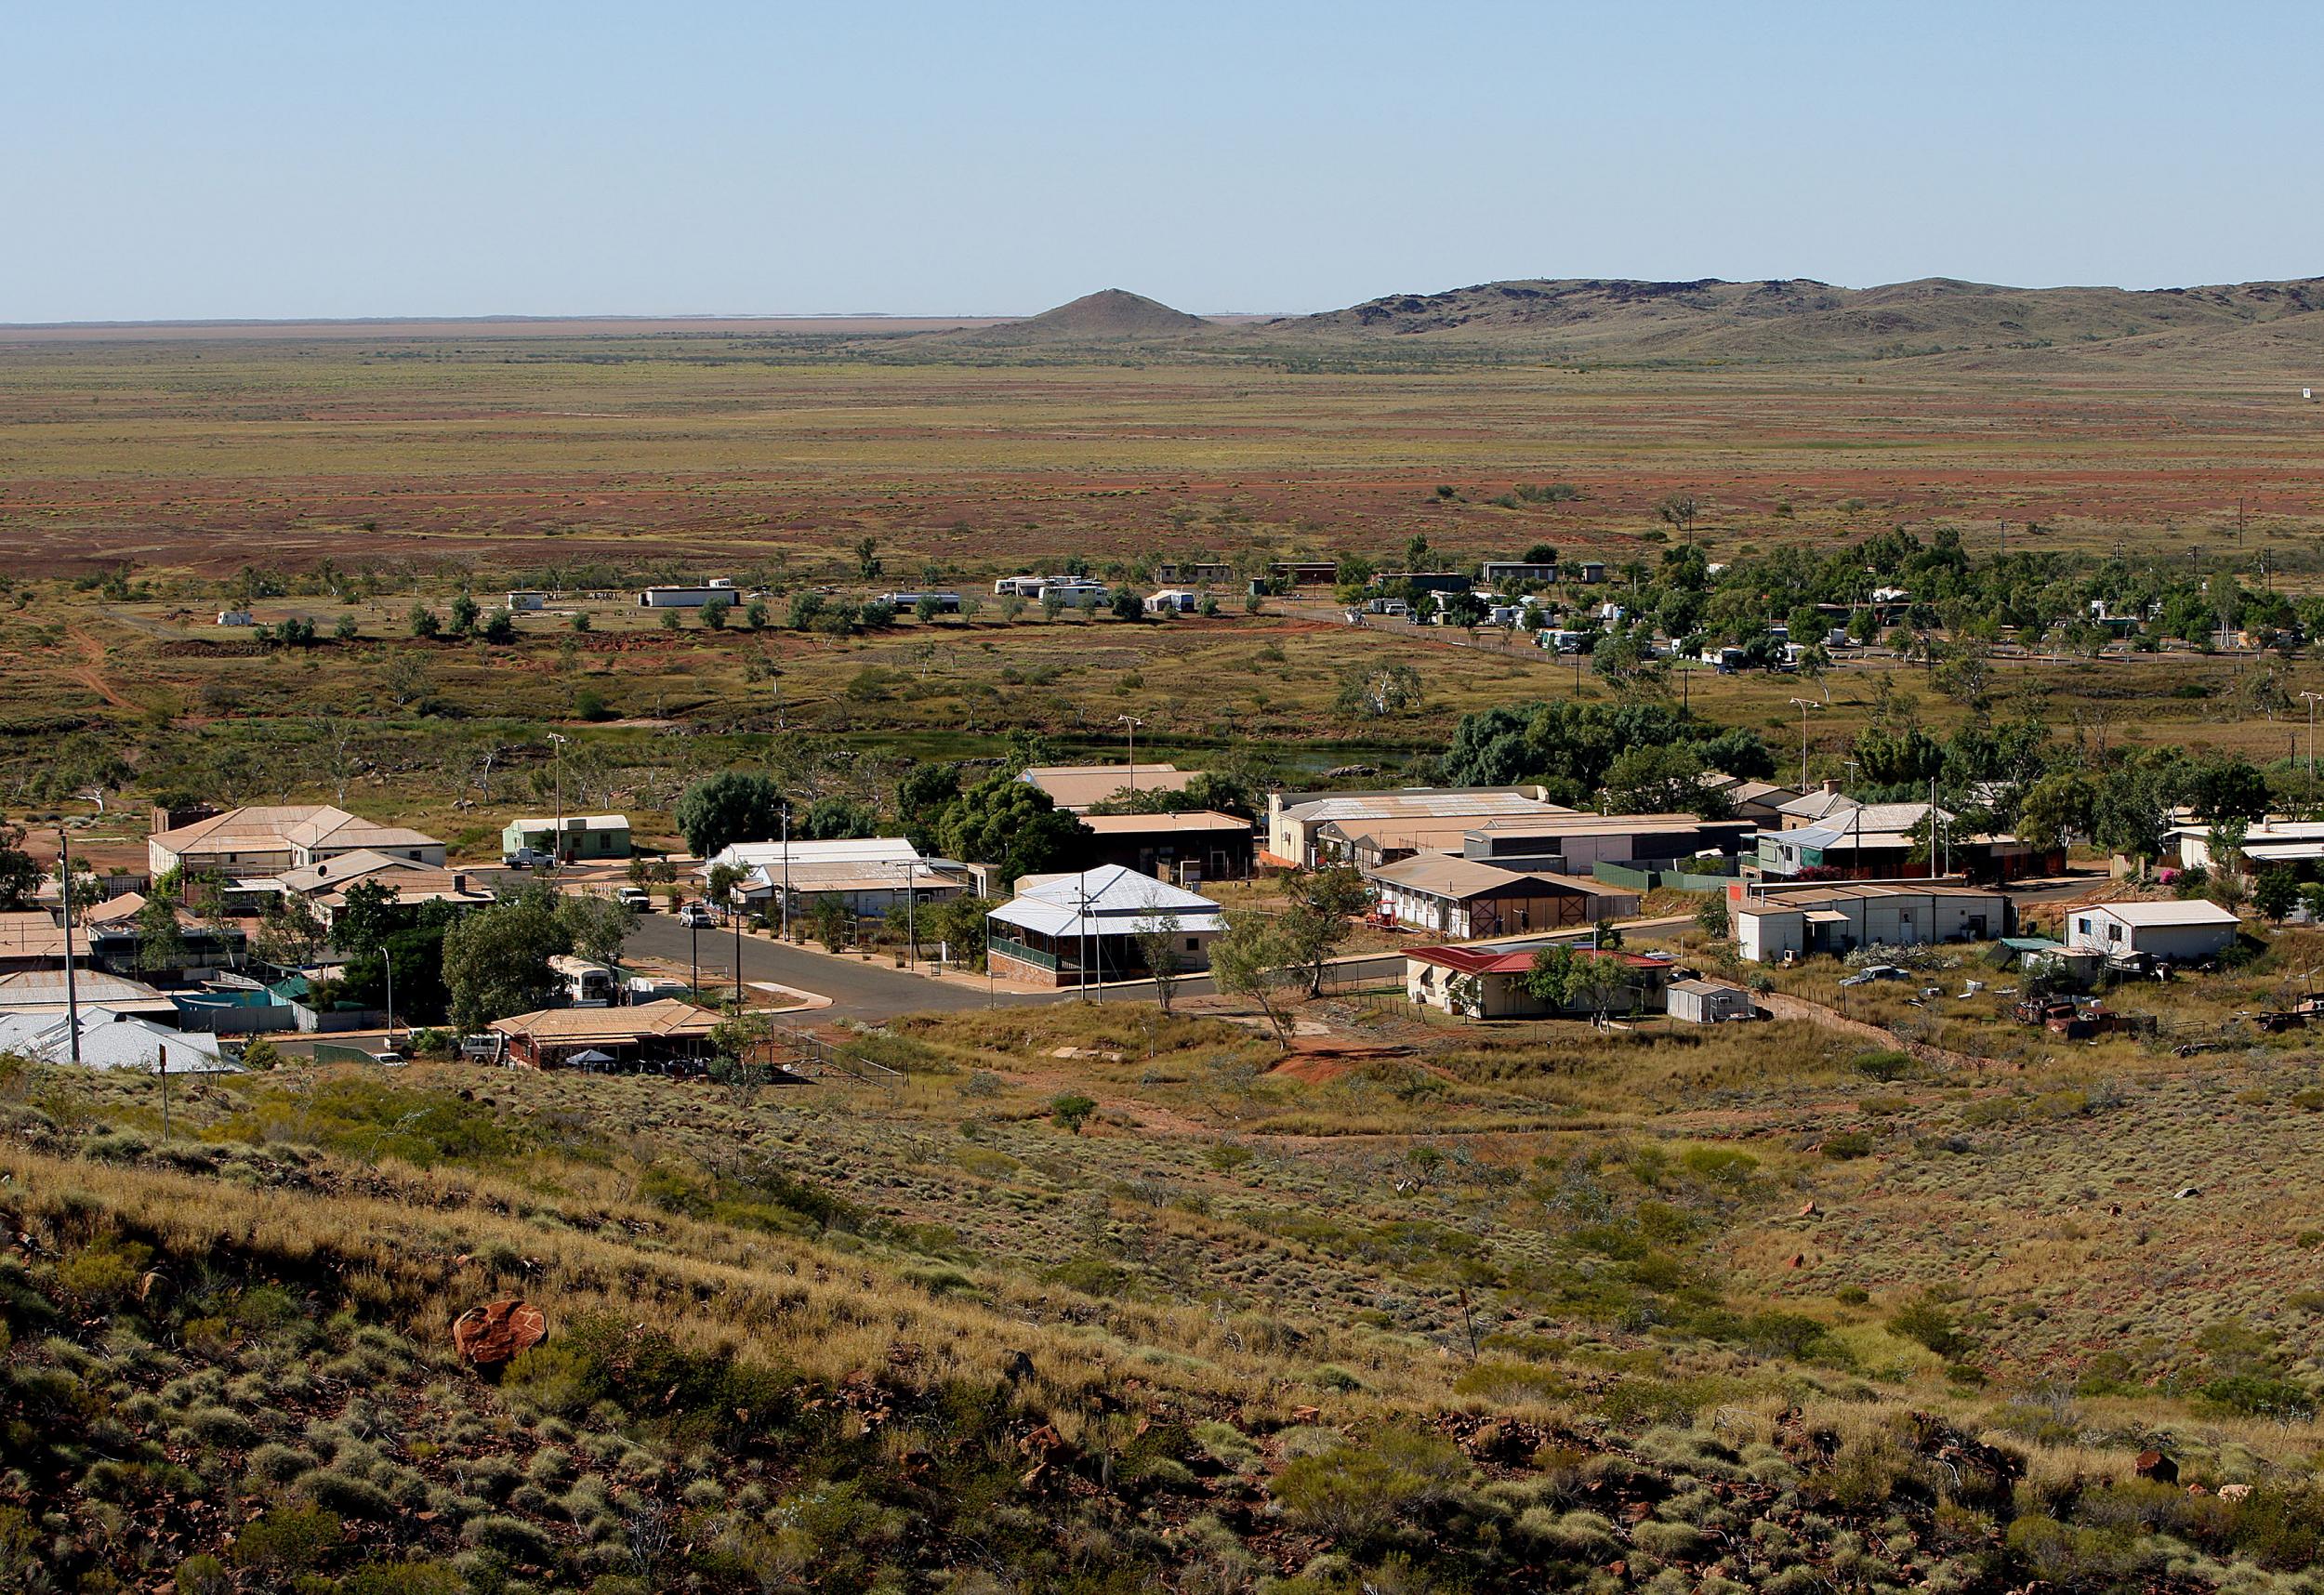 The town of Roebourne in the north of Western Australia has one of the world's highest rates of child sex abuse